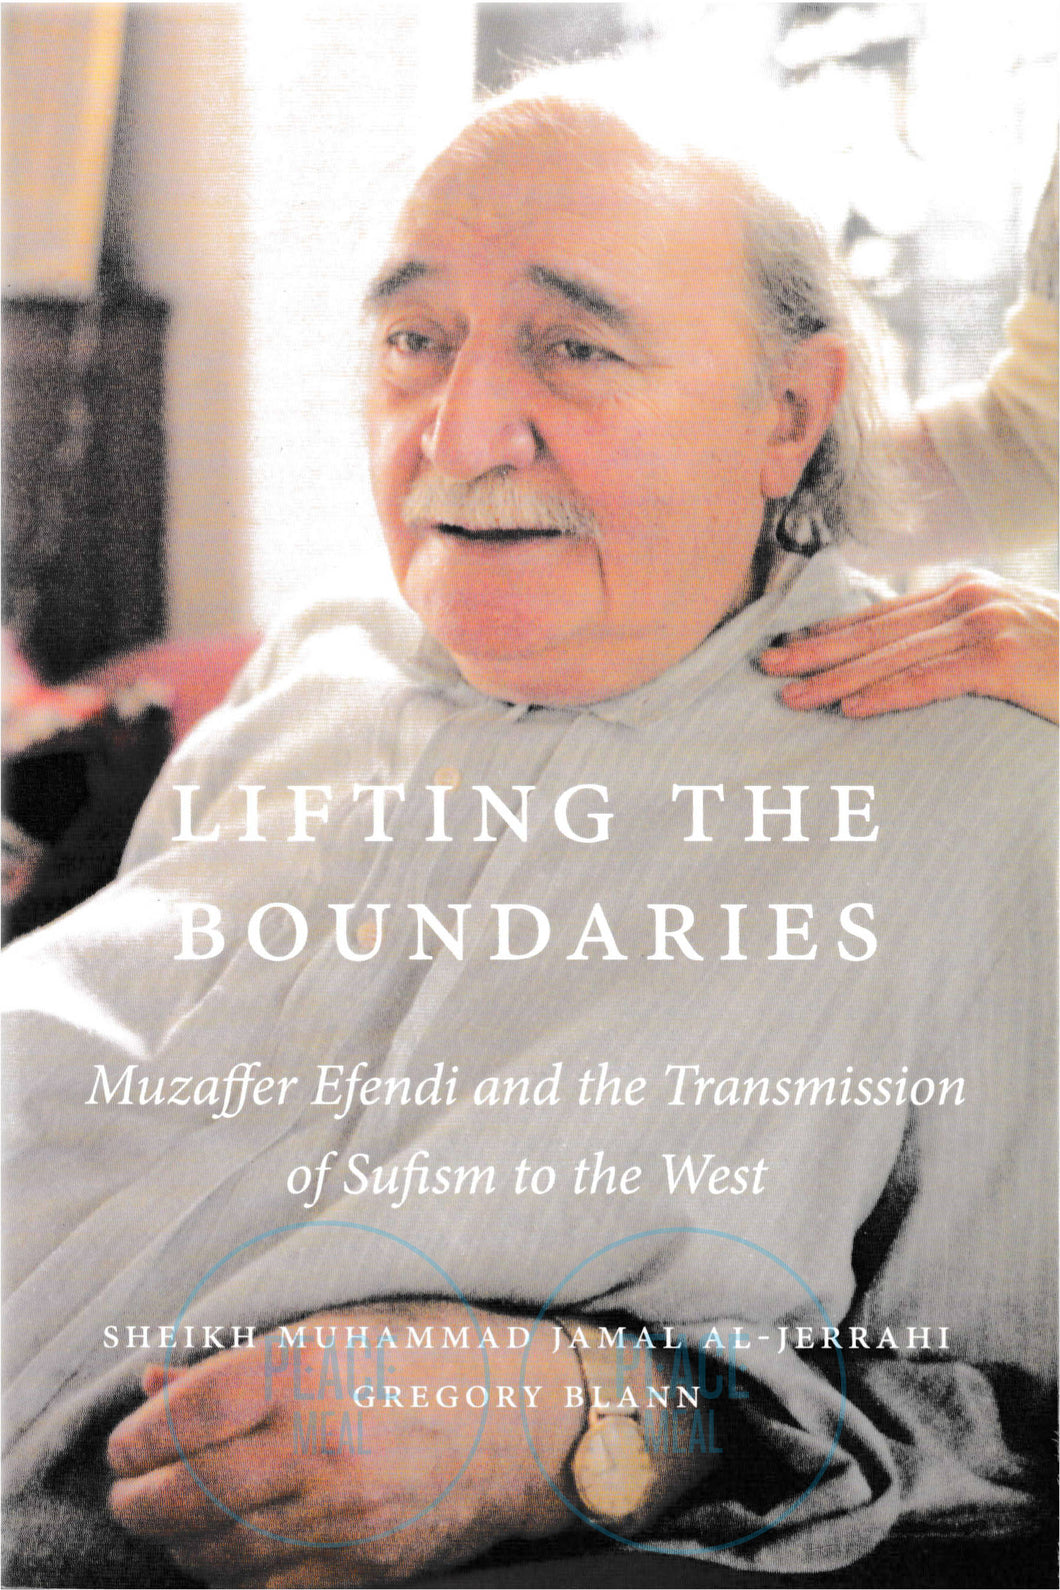 Lifting the Boundaries: Muzaffer Efendi and the Transmission of Sufism to the West